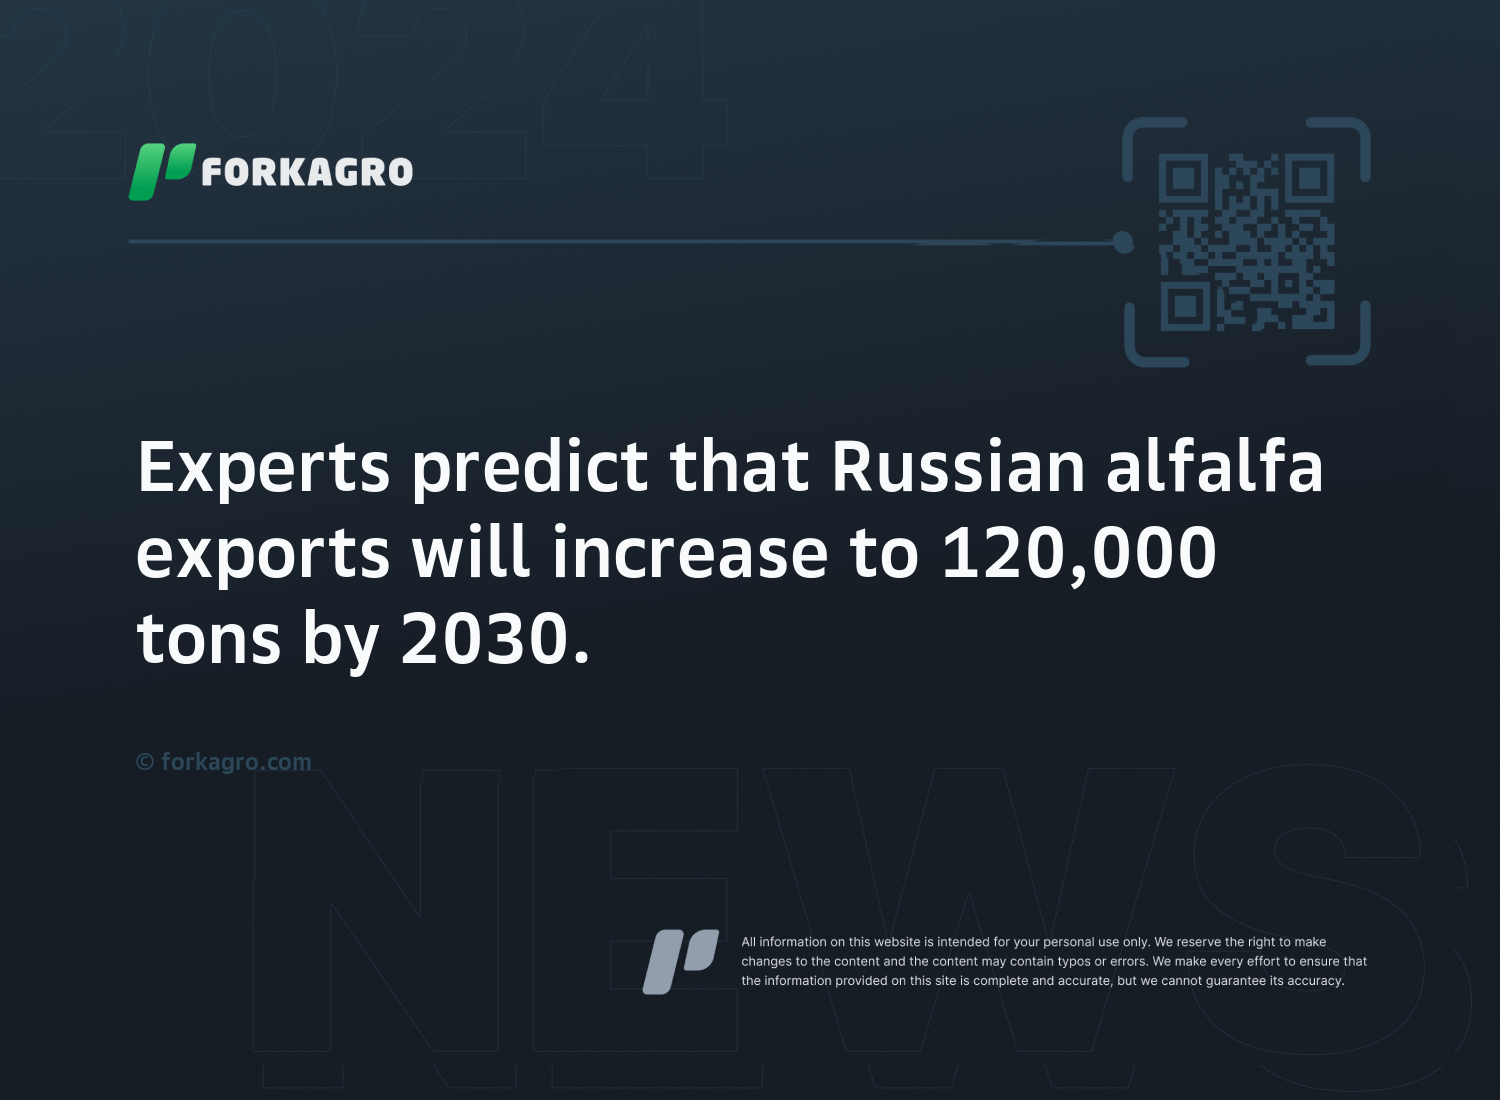 Experts predict that Russian alfalfa exports will increase to 120,000 tons by 2030.